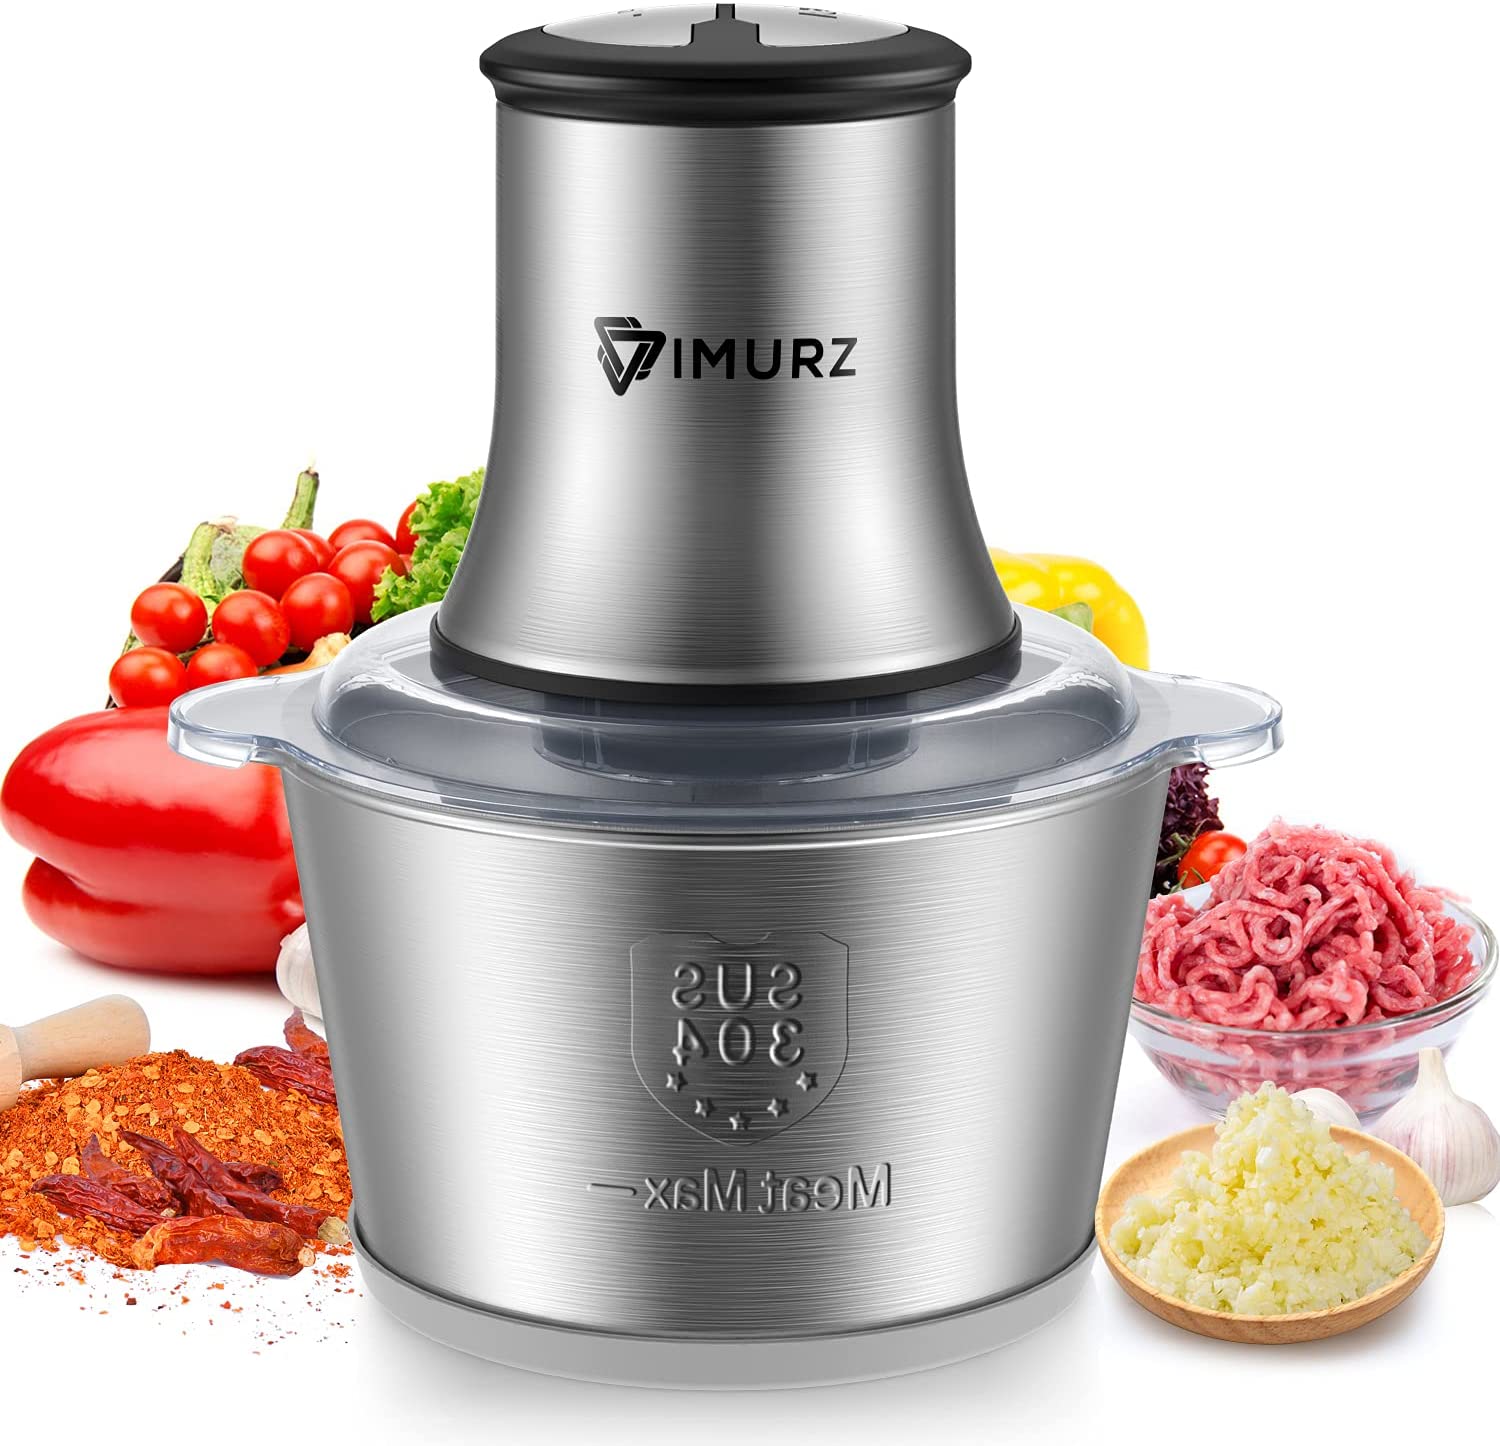 IMURZ Electric Chopper Universal Chopper with 2 L Stainless Steel Container, 500 W Meat Mincer Multi-Chopper for Fruit, Vegetables, Meat, Garlic, Baby Food Upgrade